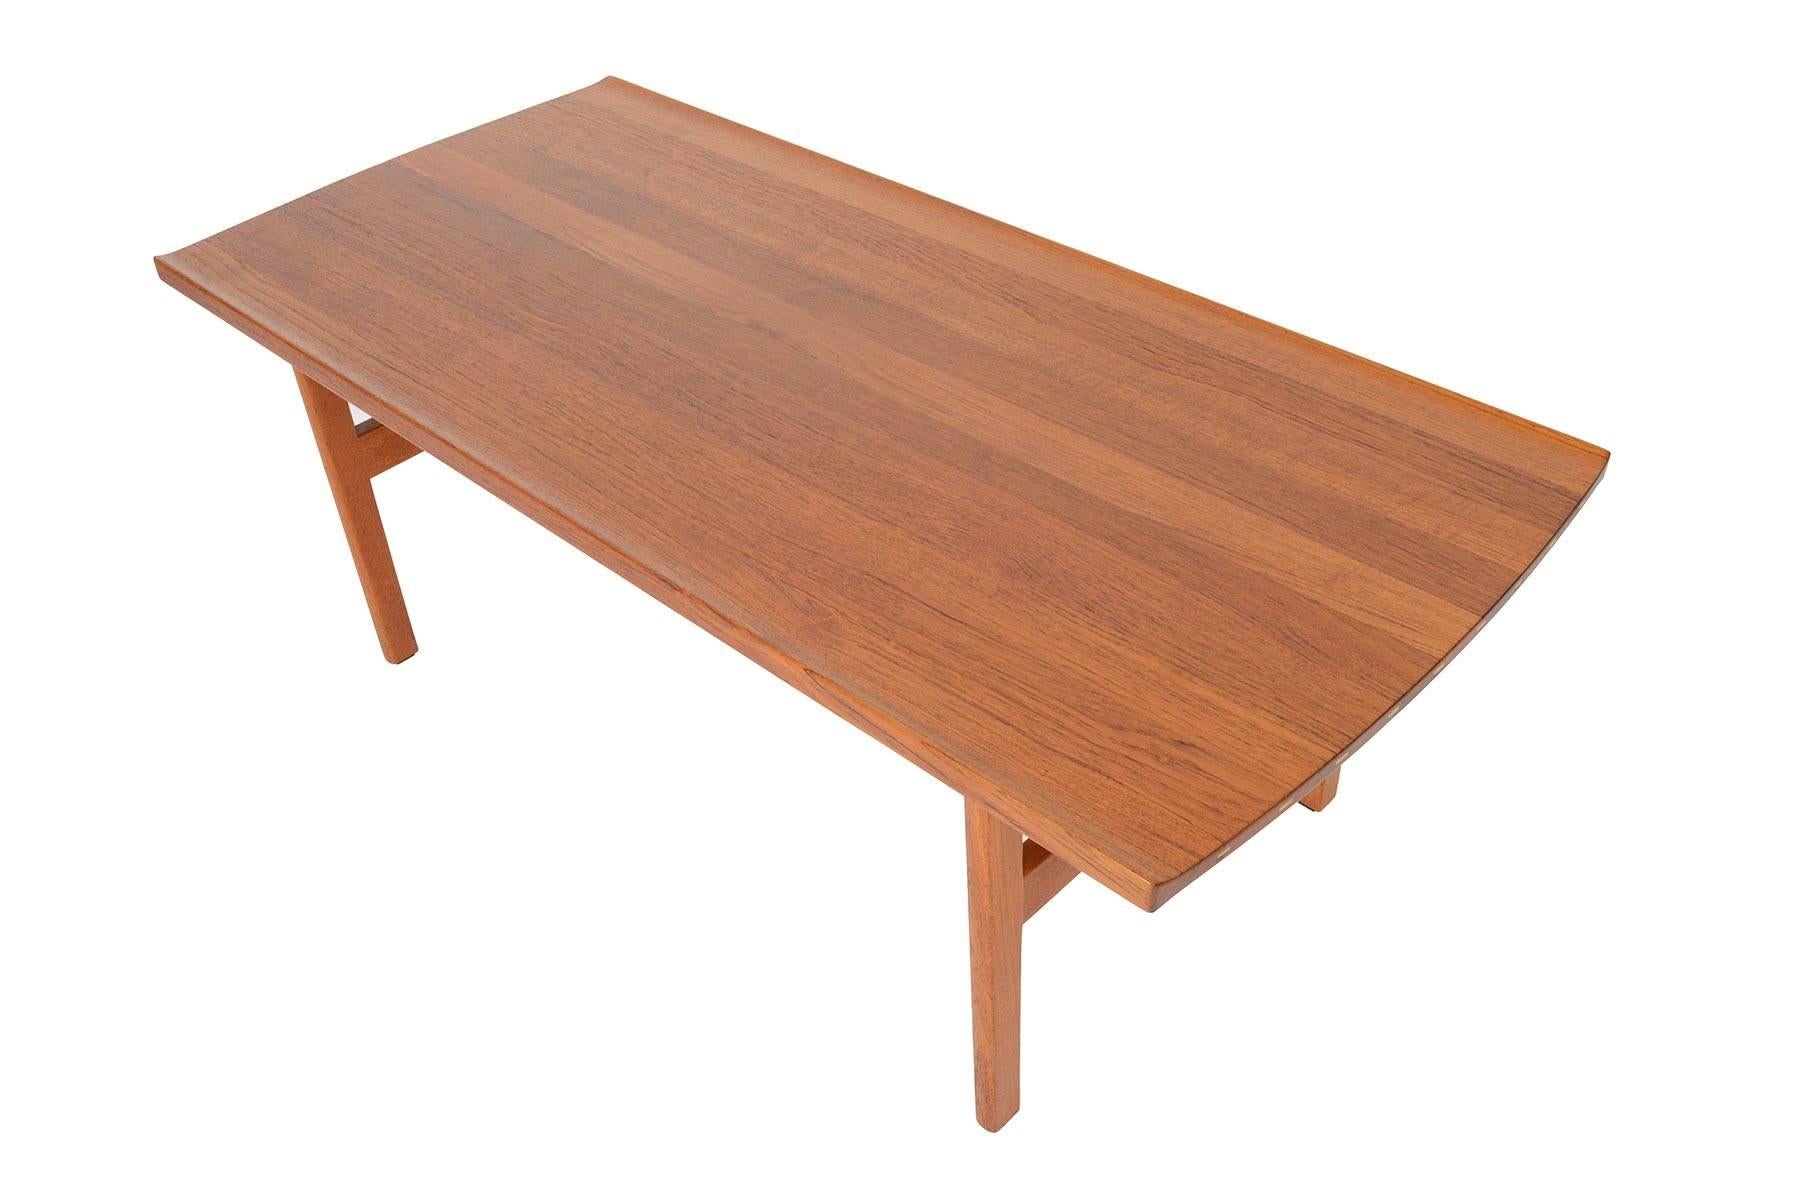 Refinished Solid Teak Coffee Table by Tove and Edvard Kindt - Larsen 1